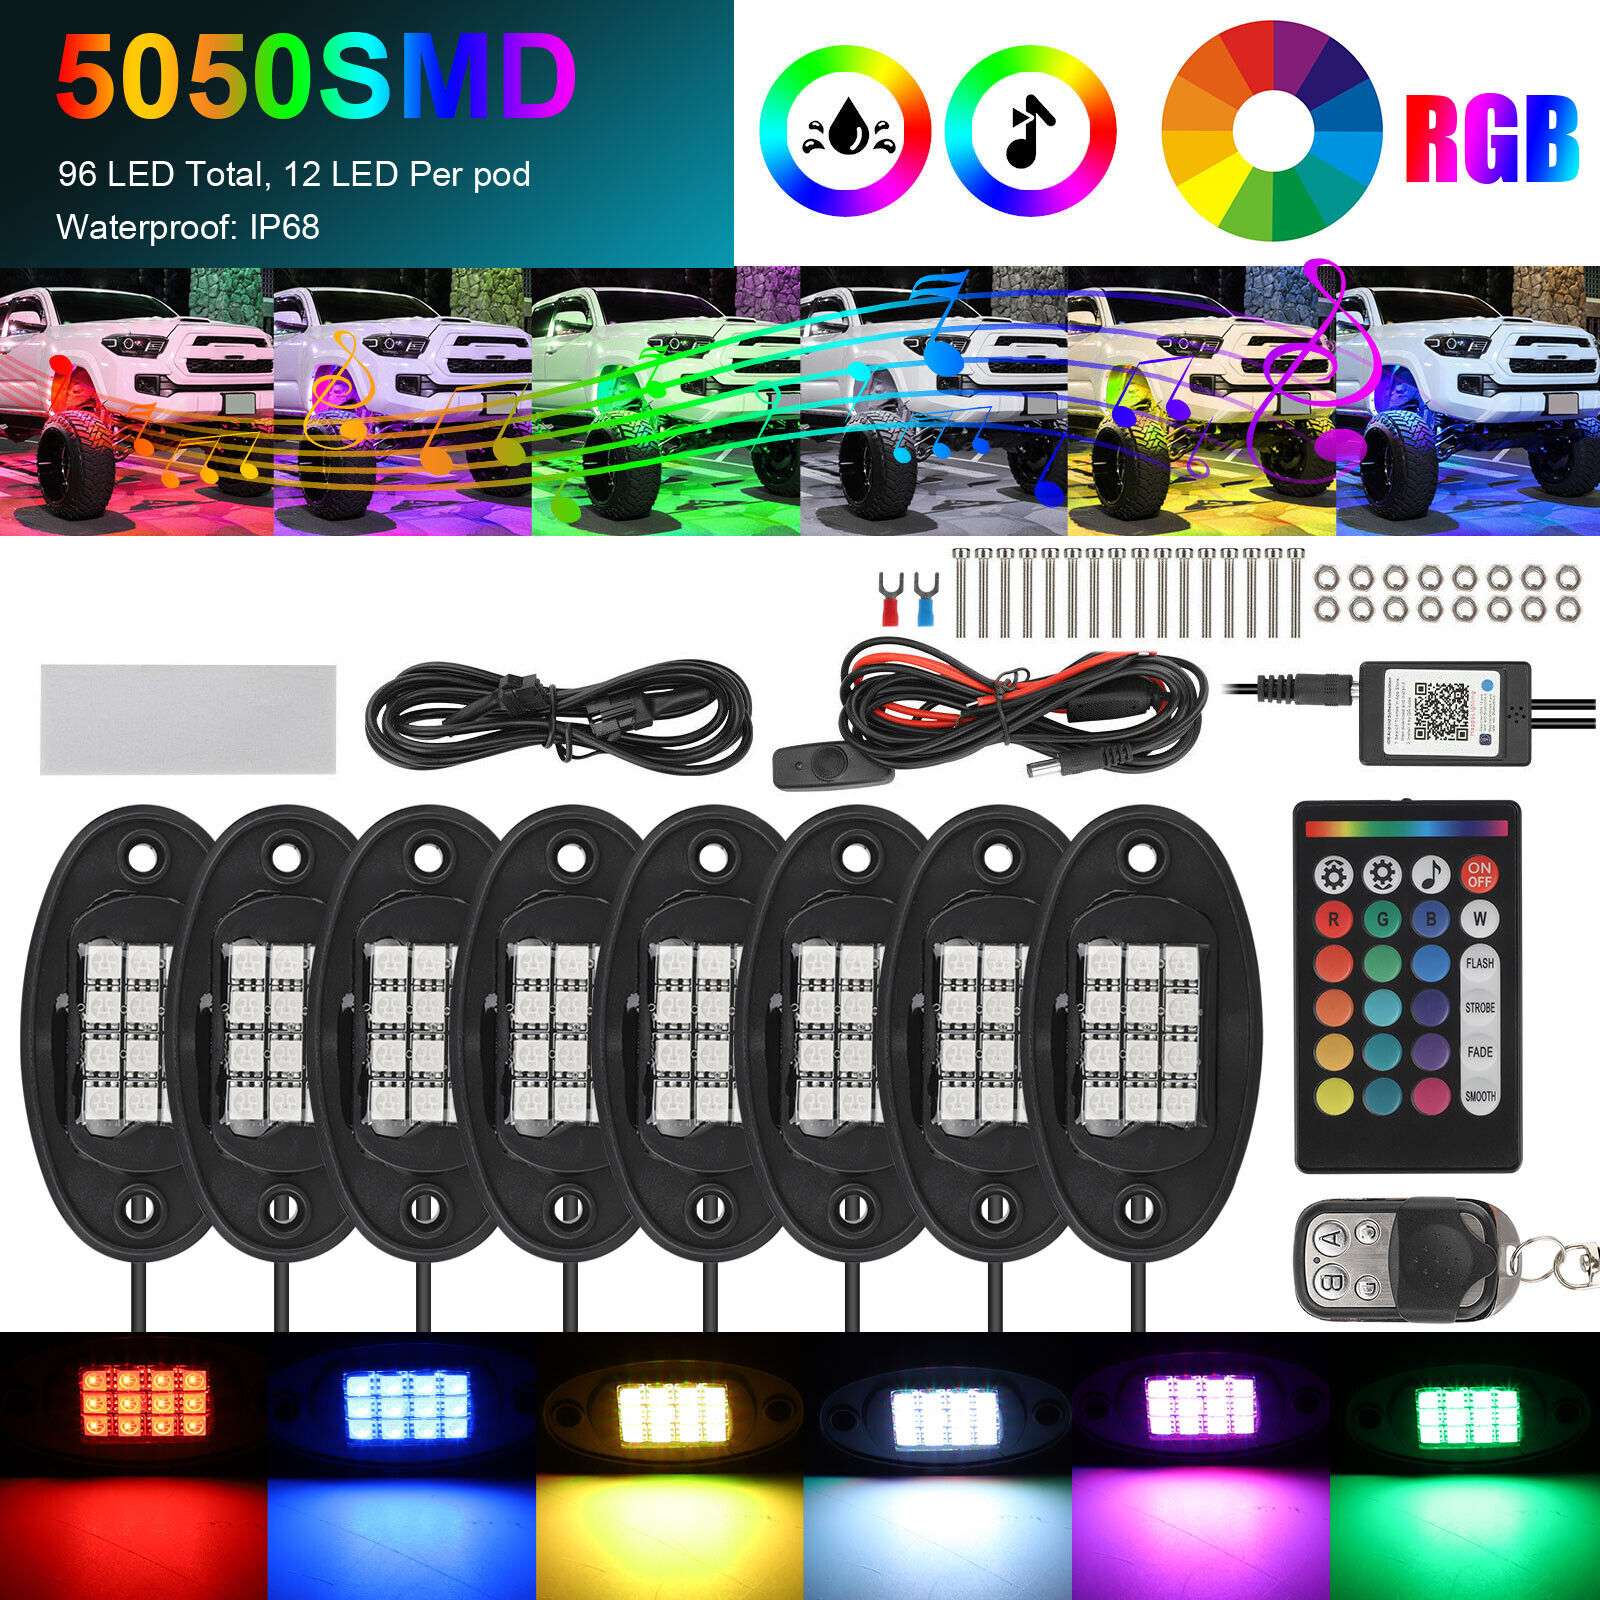 8 Pods RGB LED Rock Lights Offroad Truck Underbody Glow Neon Lamp Remote Control